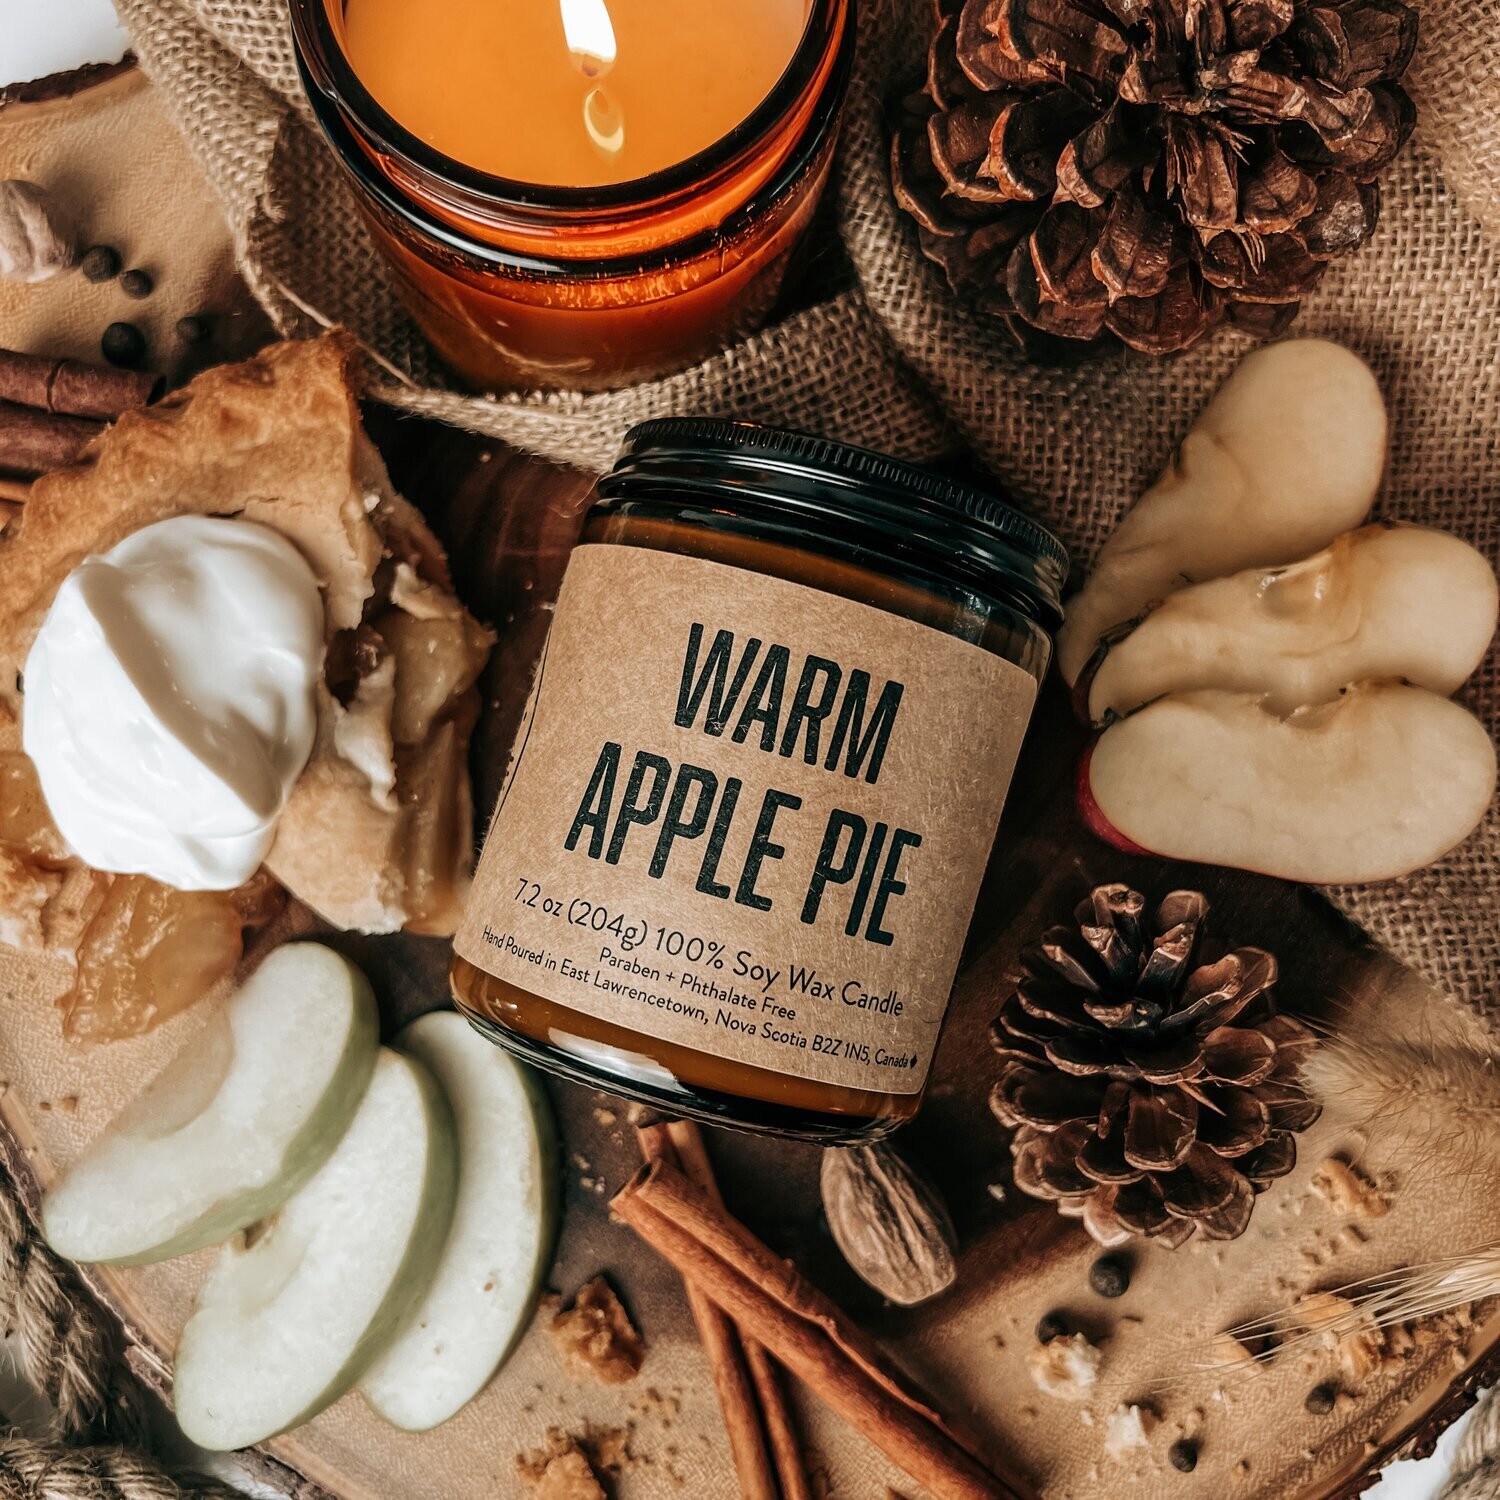 Warm Apple Pie - Lawrencetown Candle Co